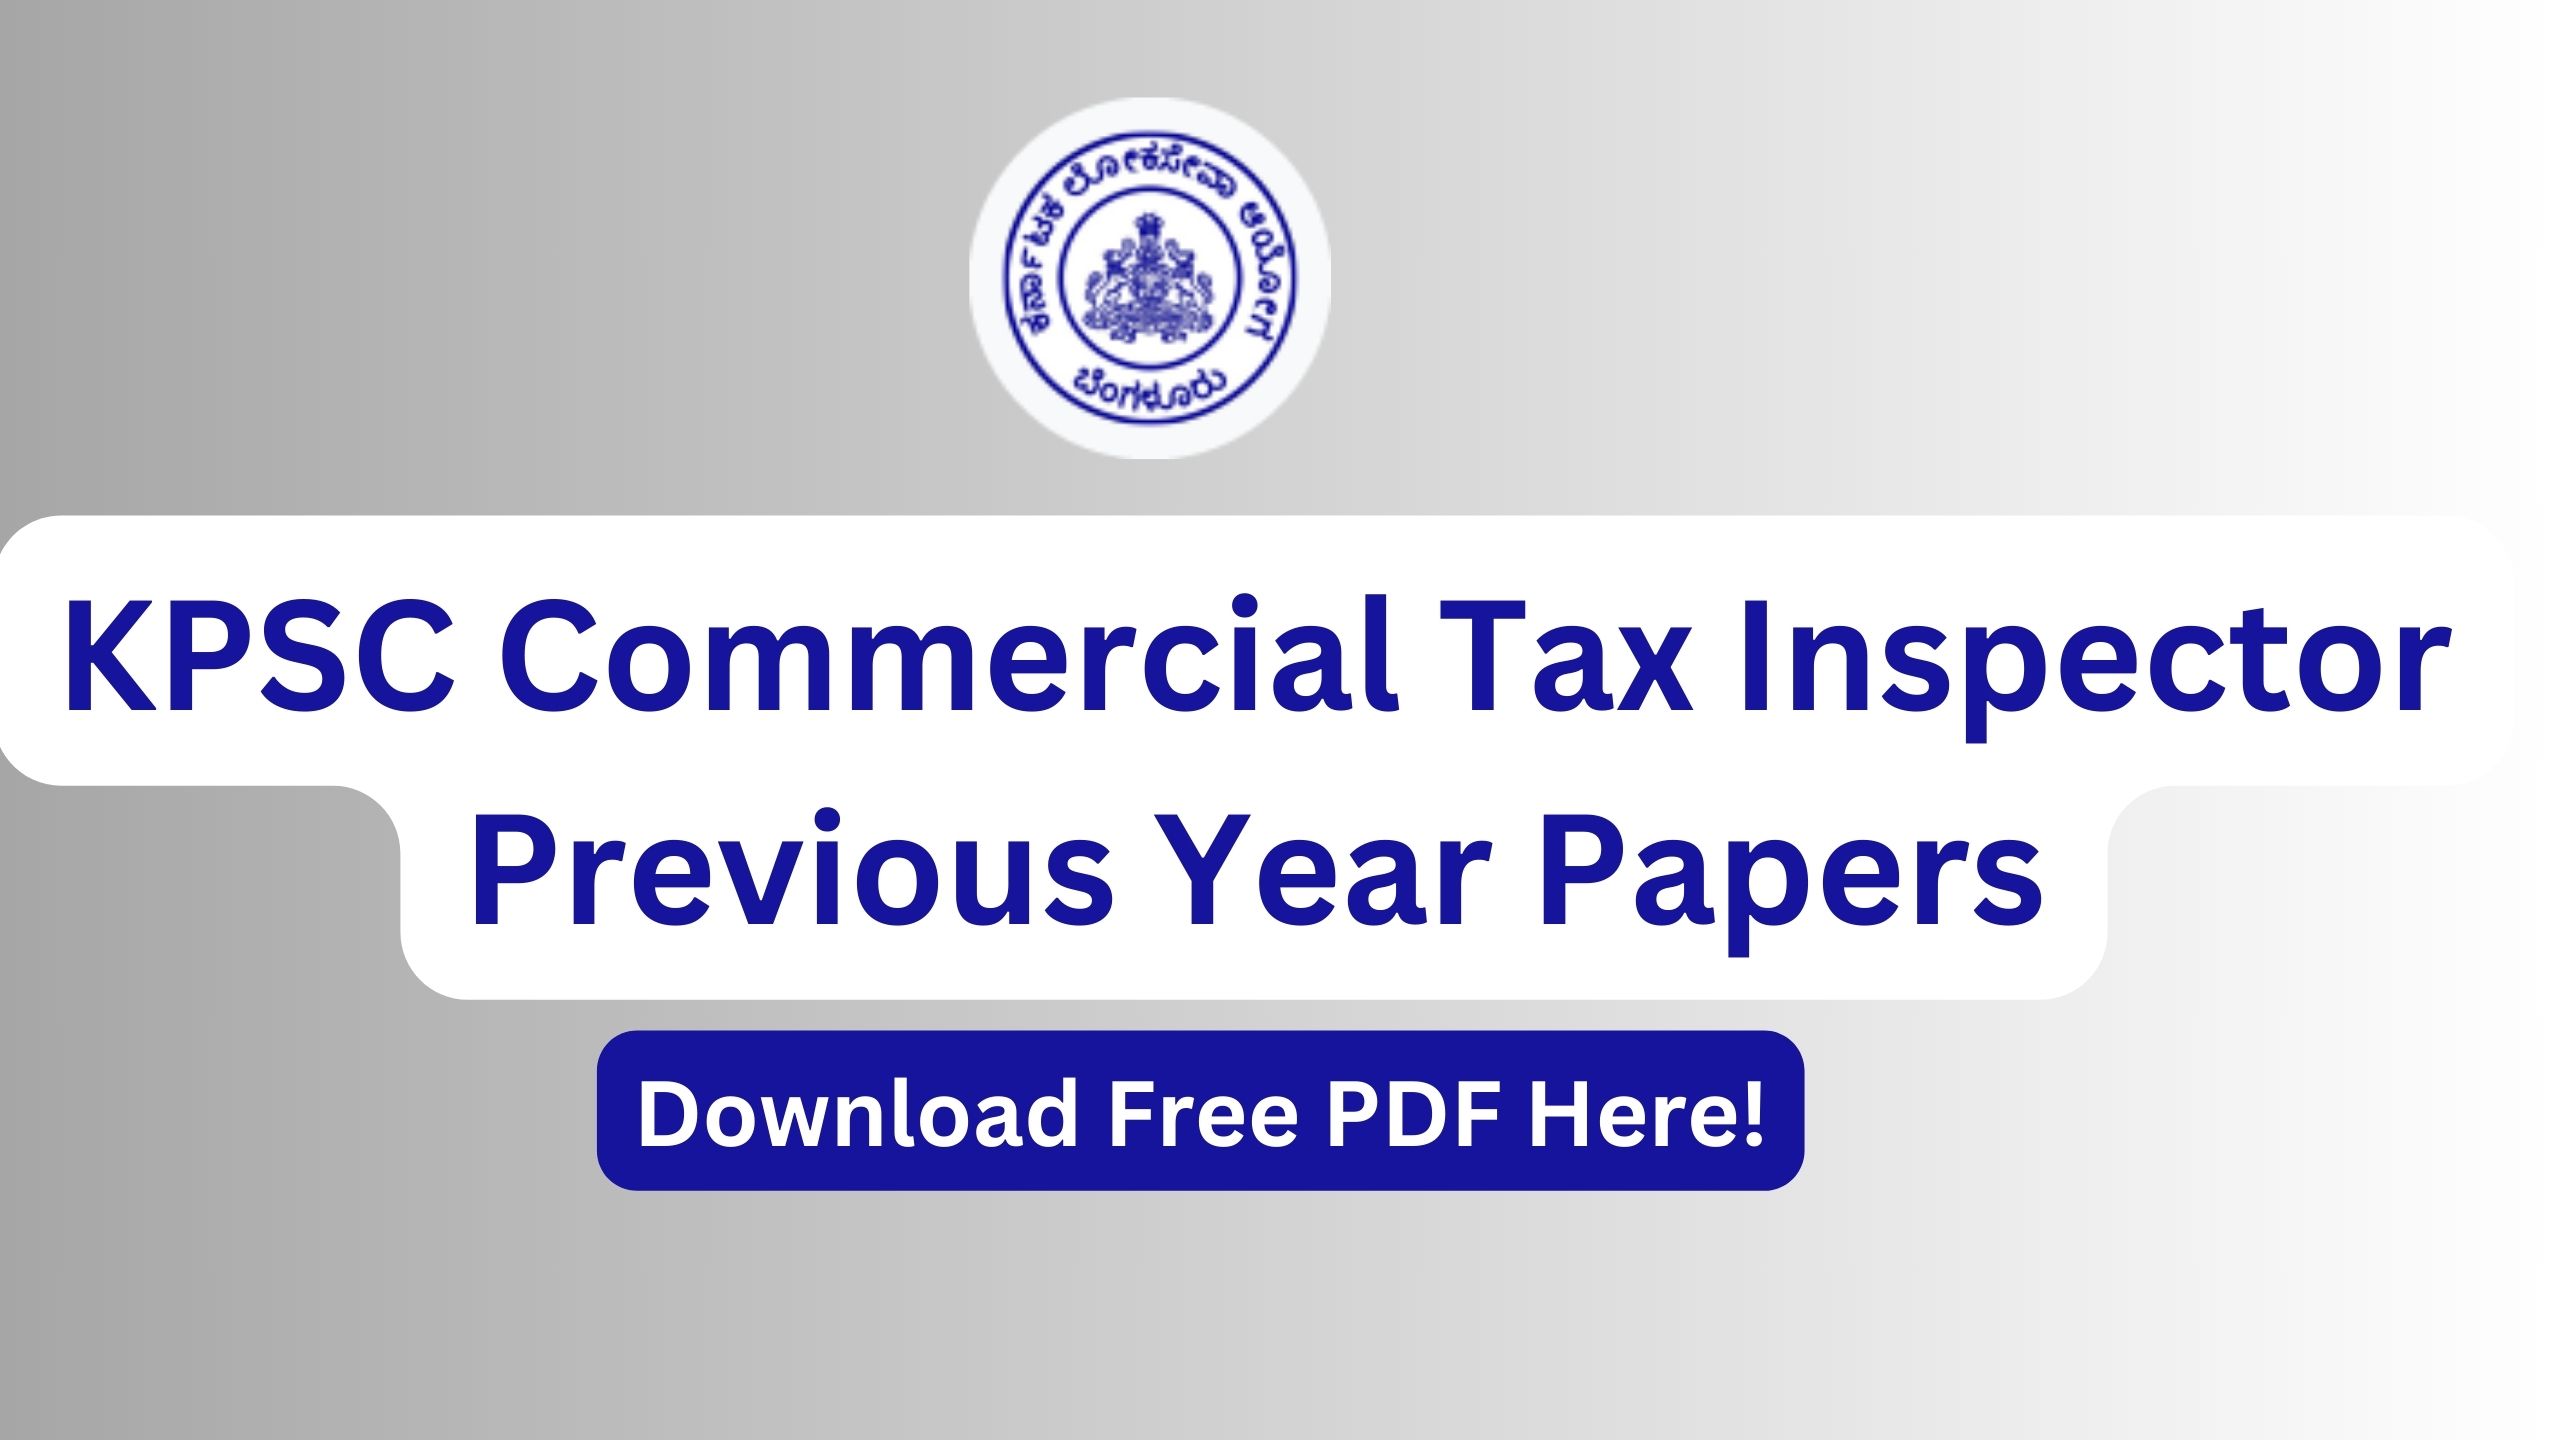 KPSC Commercial Tax Inspector Previous Year Papers